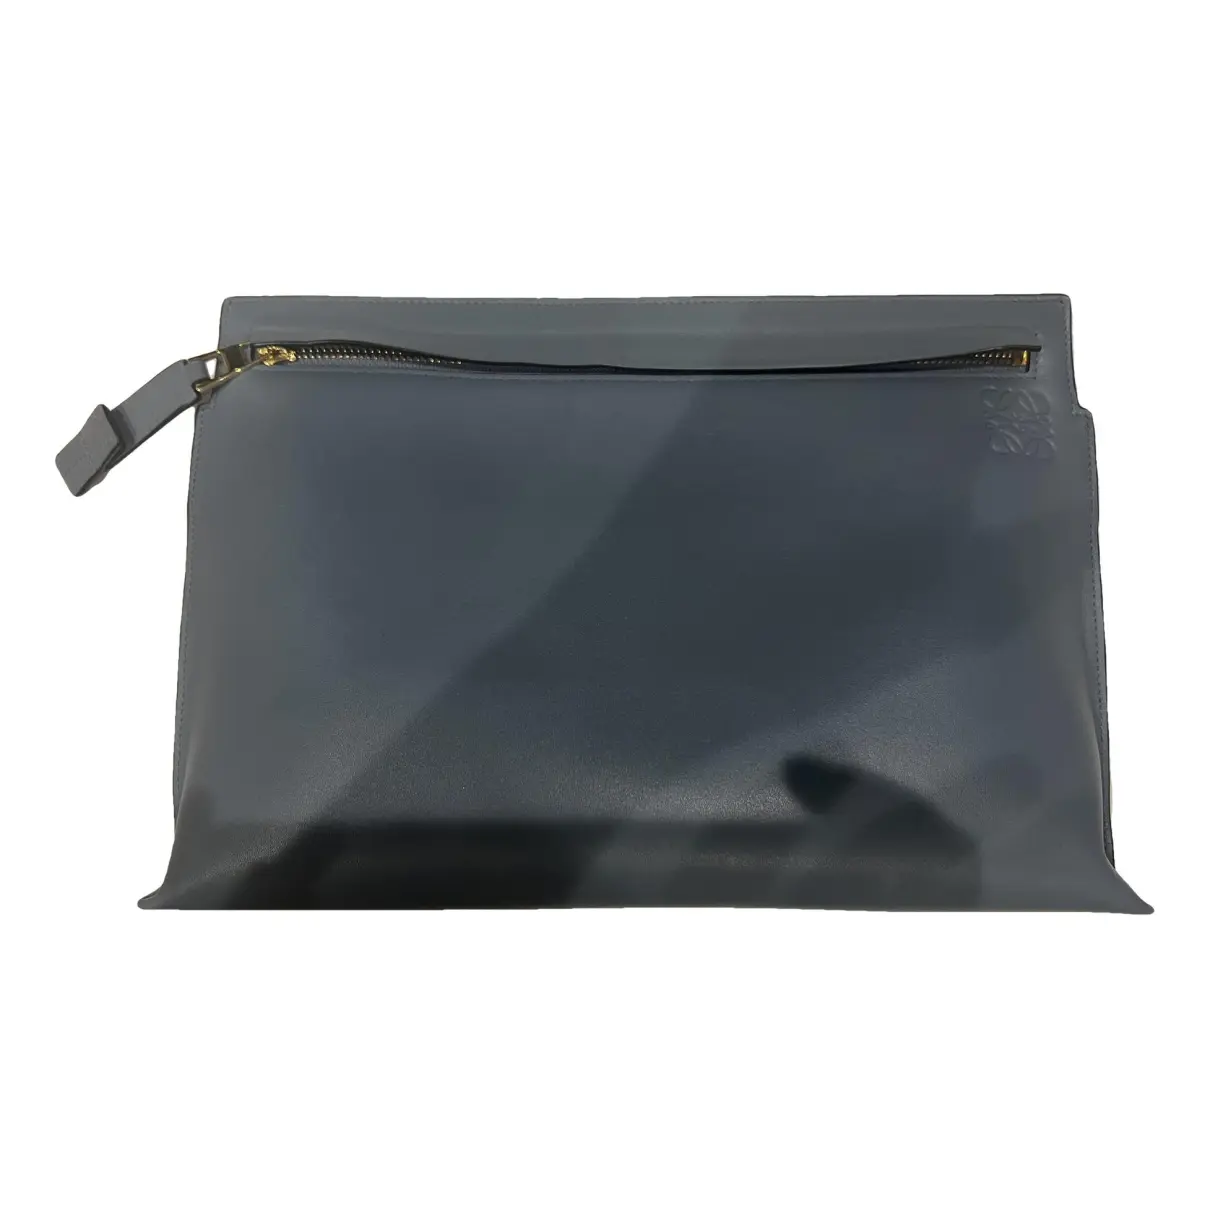 T Pouch leather clutch bag